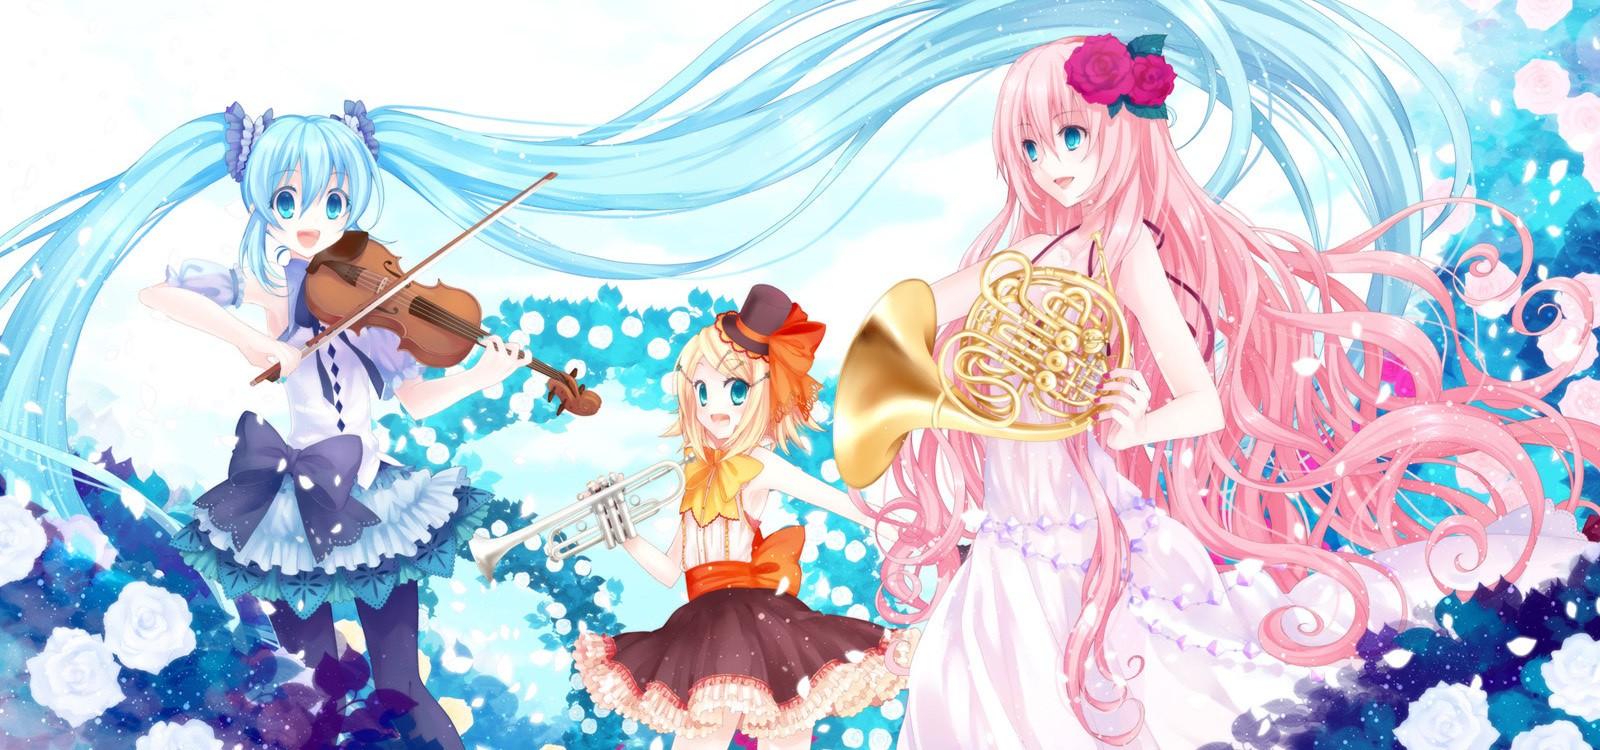 Kawaii Anime image Vocaloid Wallpaper HD wallpaper and background